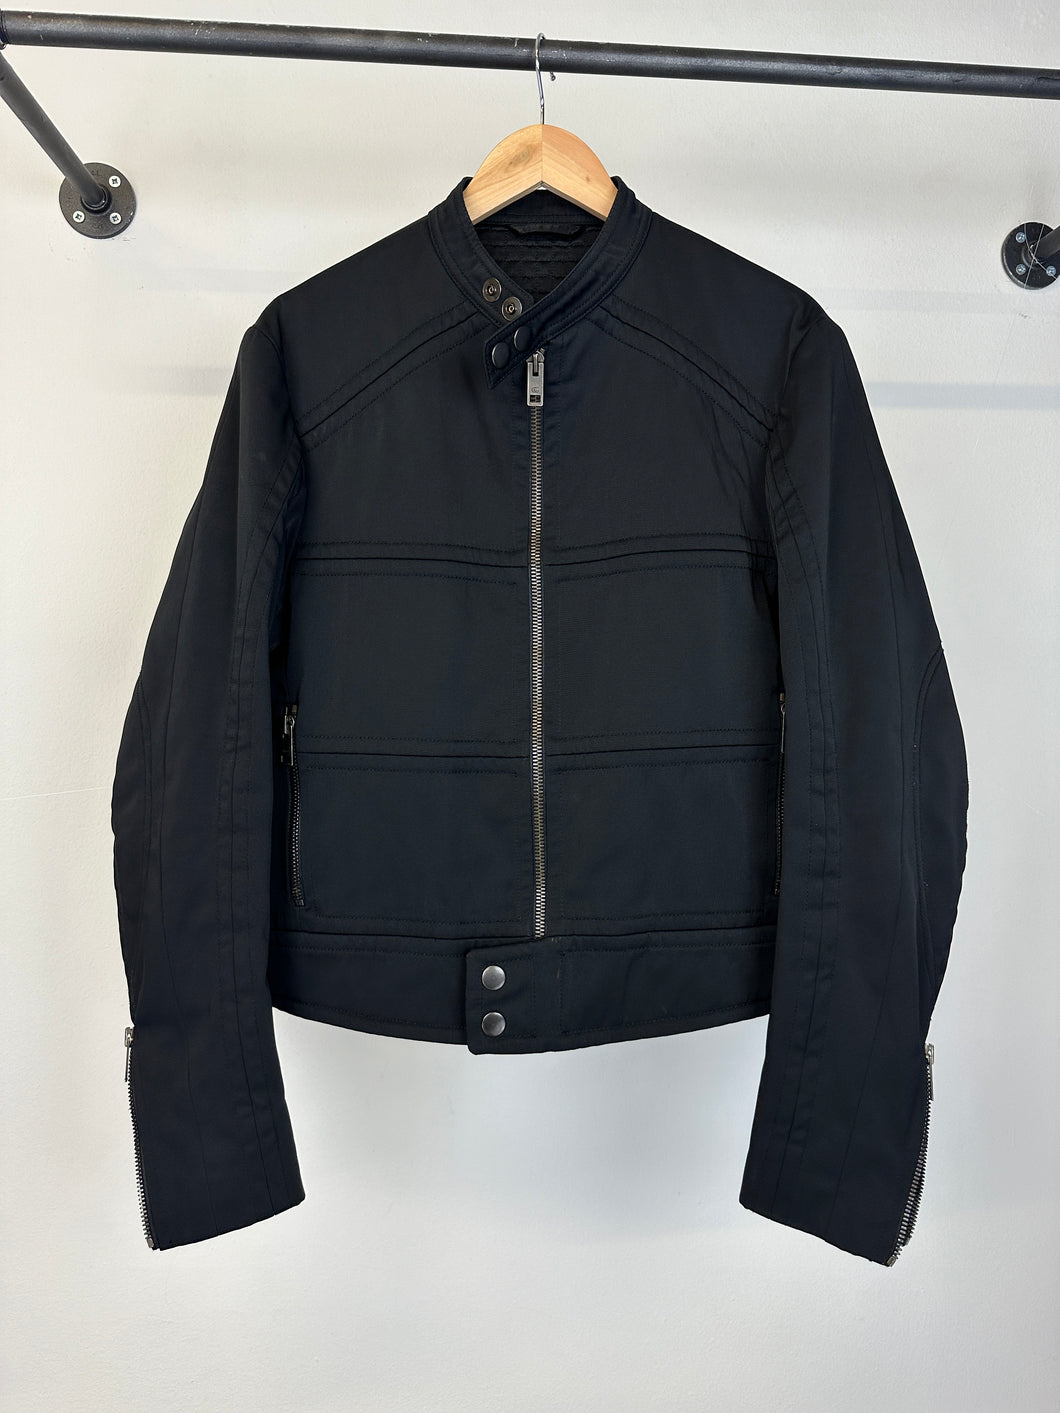 2000s Gucci by Tom Ford paneled moto jacket